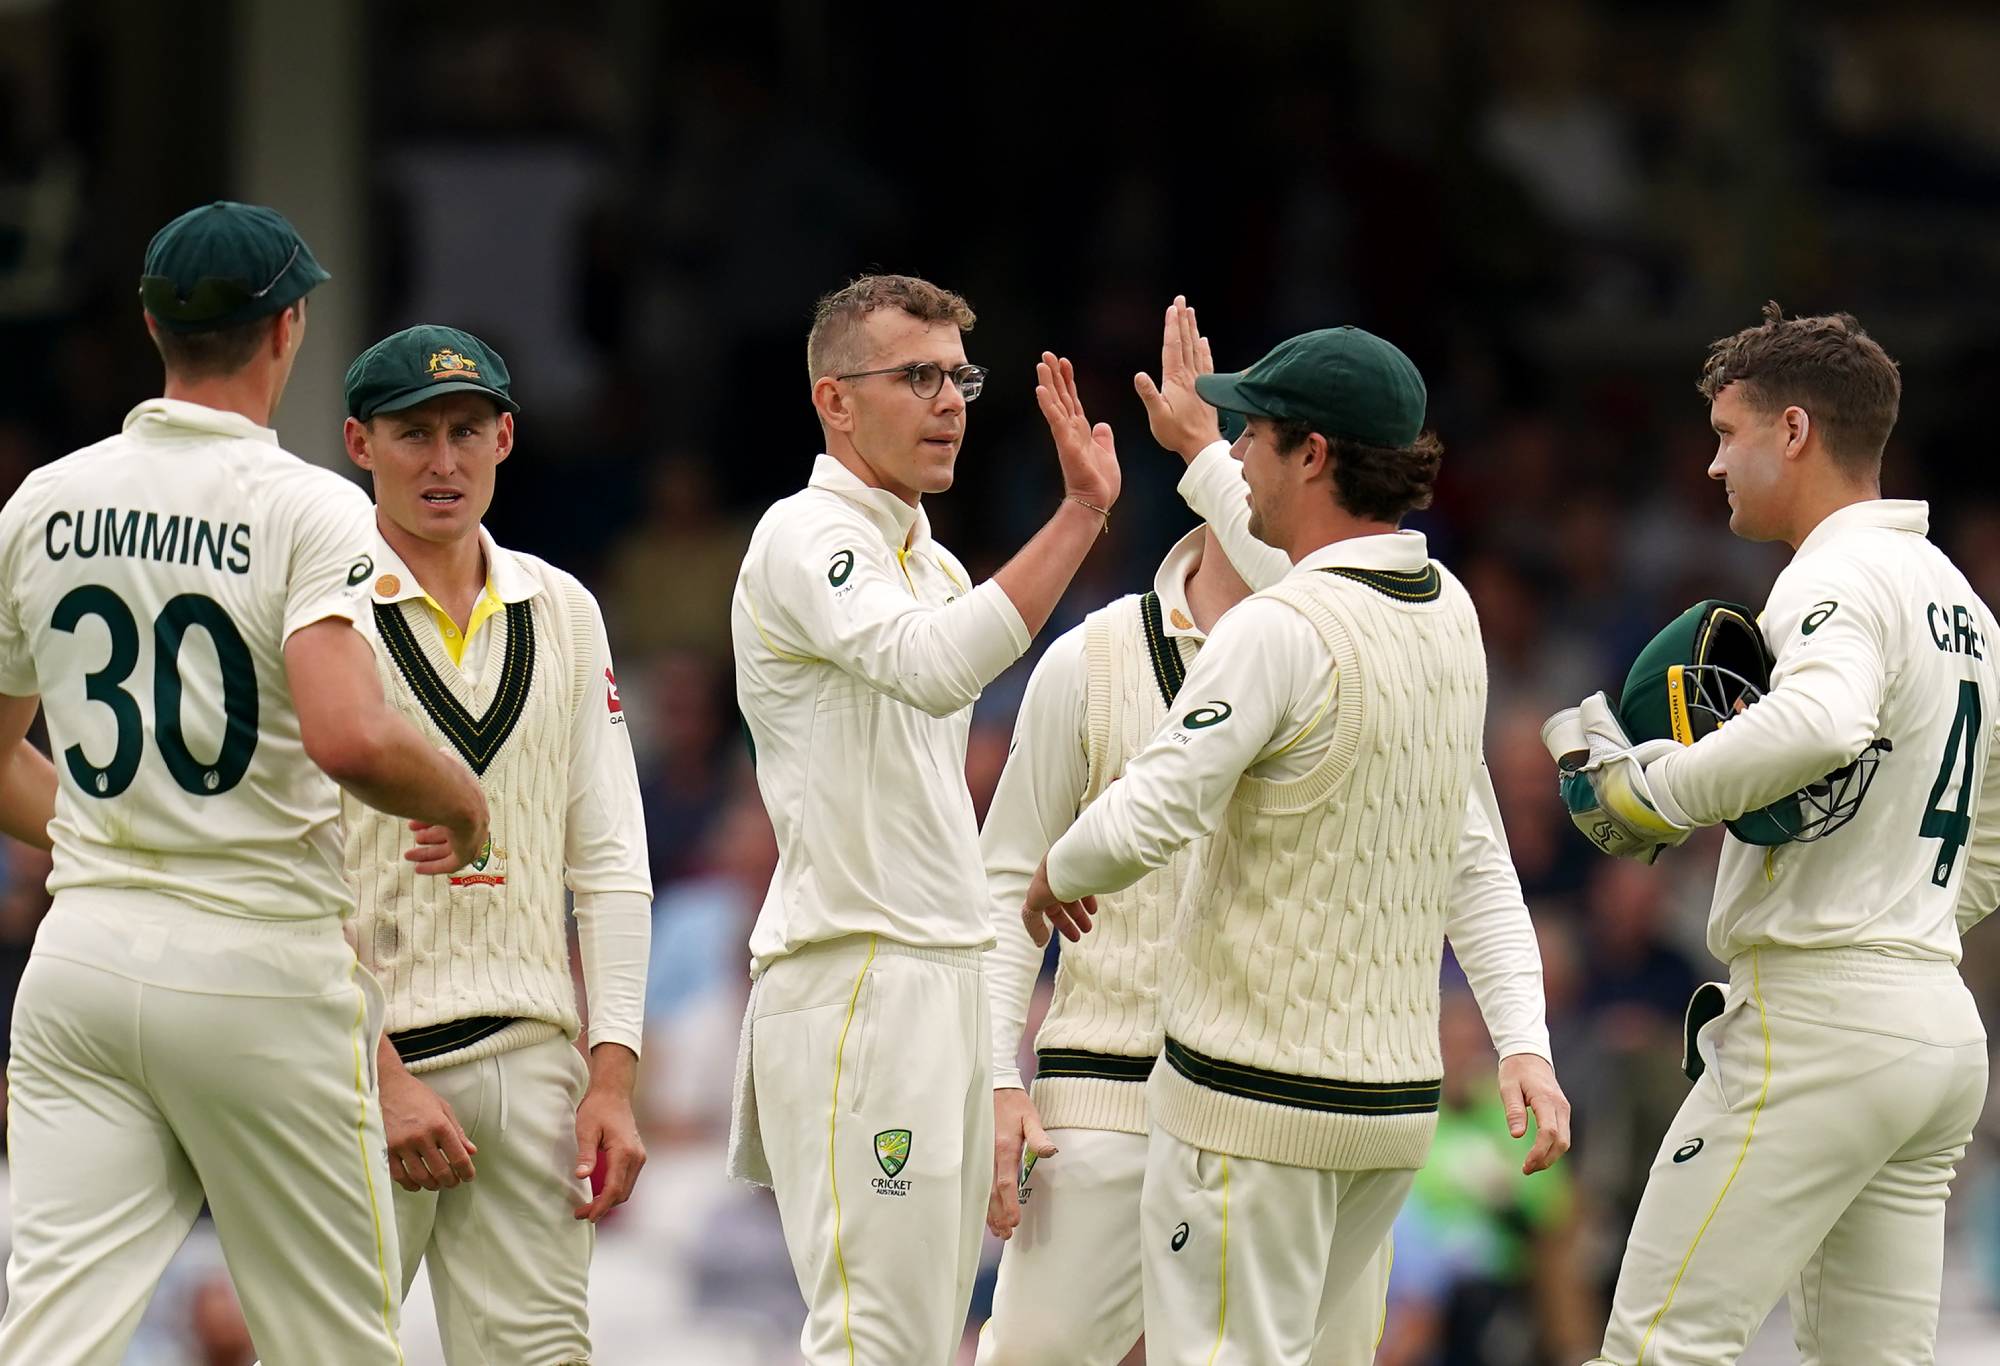 Australia's Todd Murphy celebrates with team-mates after taking the wicket of England's Moeen Ali during day one of the fifth LV= Insurance Ashes Series test match at The Kia Oval, London. Picture date: Thursday July 27, 2023. (Photo by John Walton/PA Images via Getty Images)